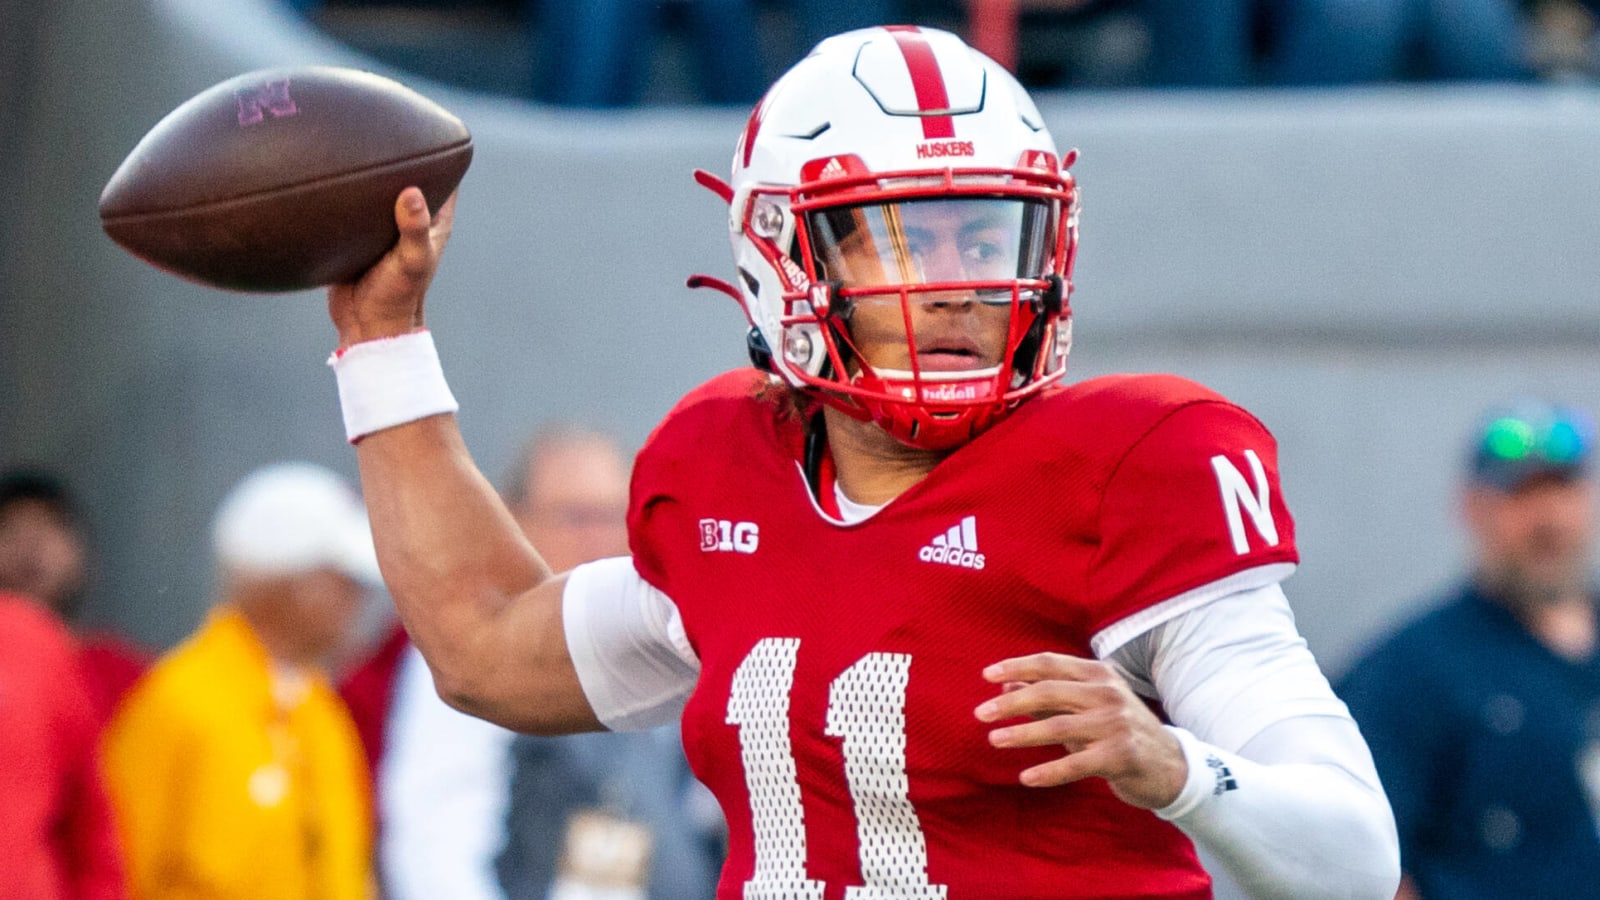 Who's up next for Nebraska after former starting QB transfers?